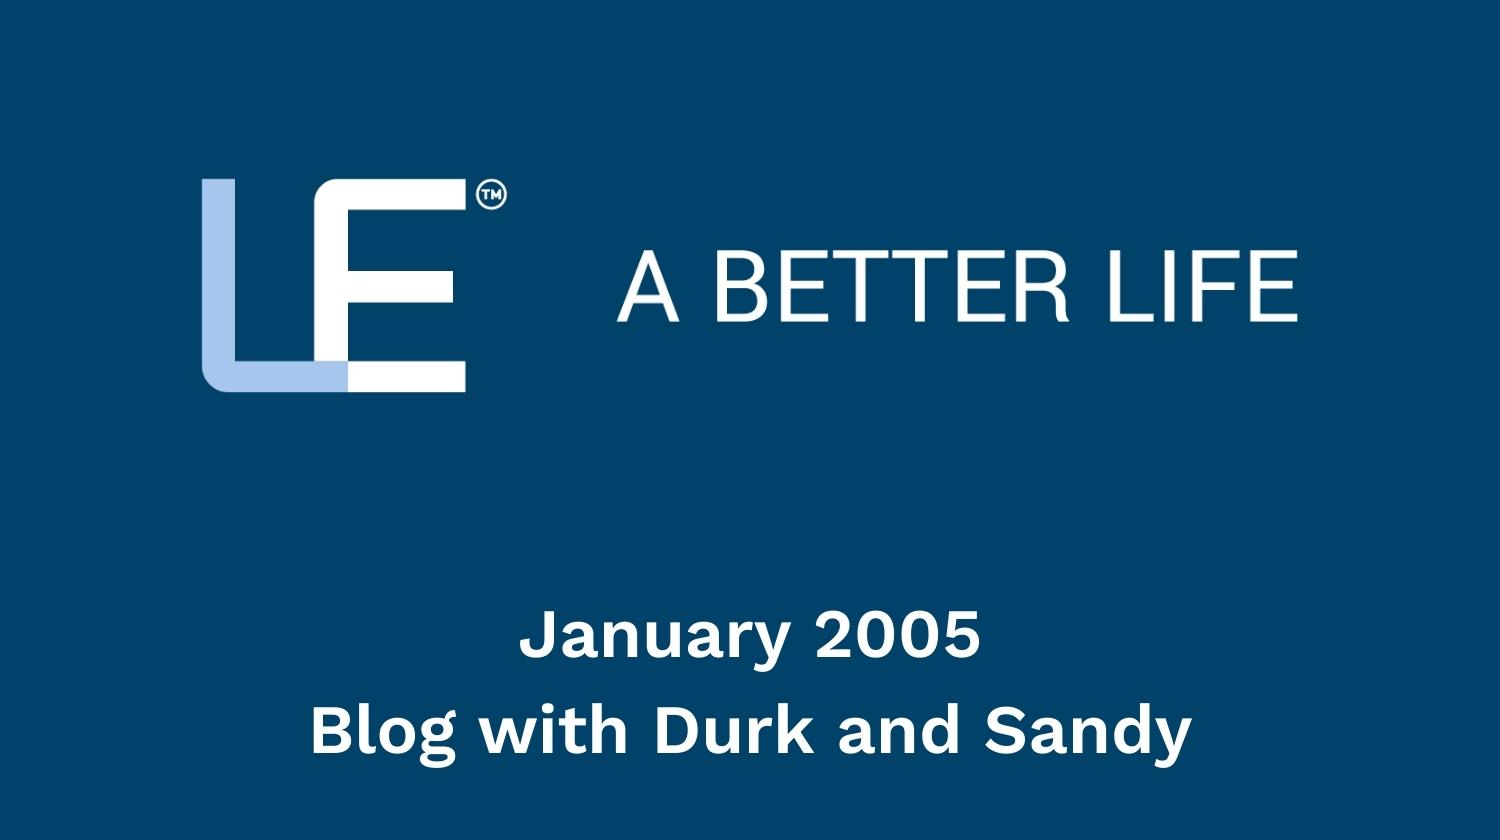 January 2005 Blog with Durk and Sandy